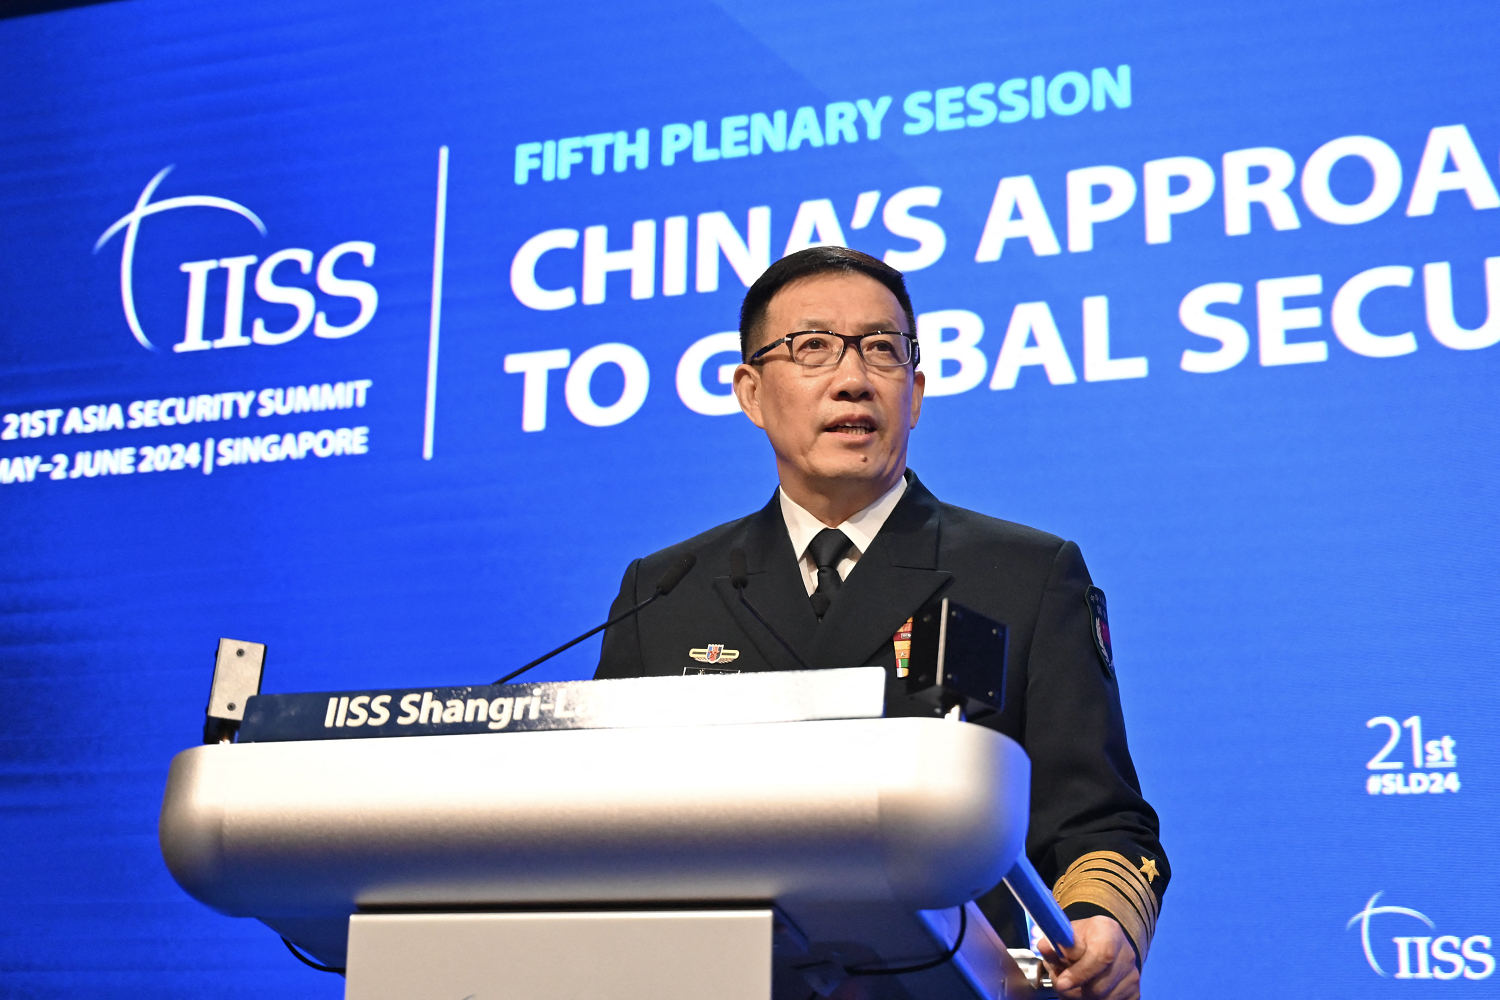 Chinese defense minister accuses U.S. of causing friction with its support for Taiwan and Philippines